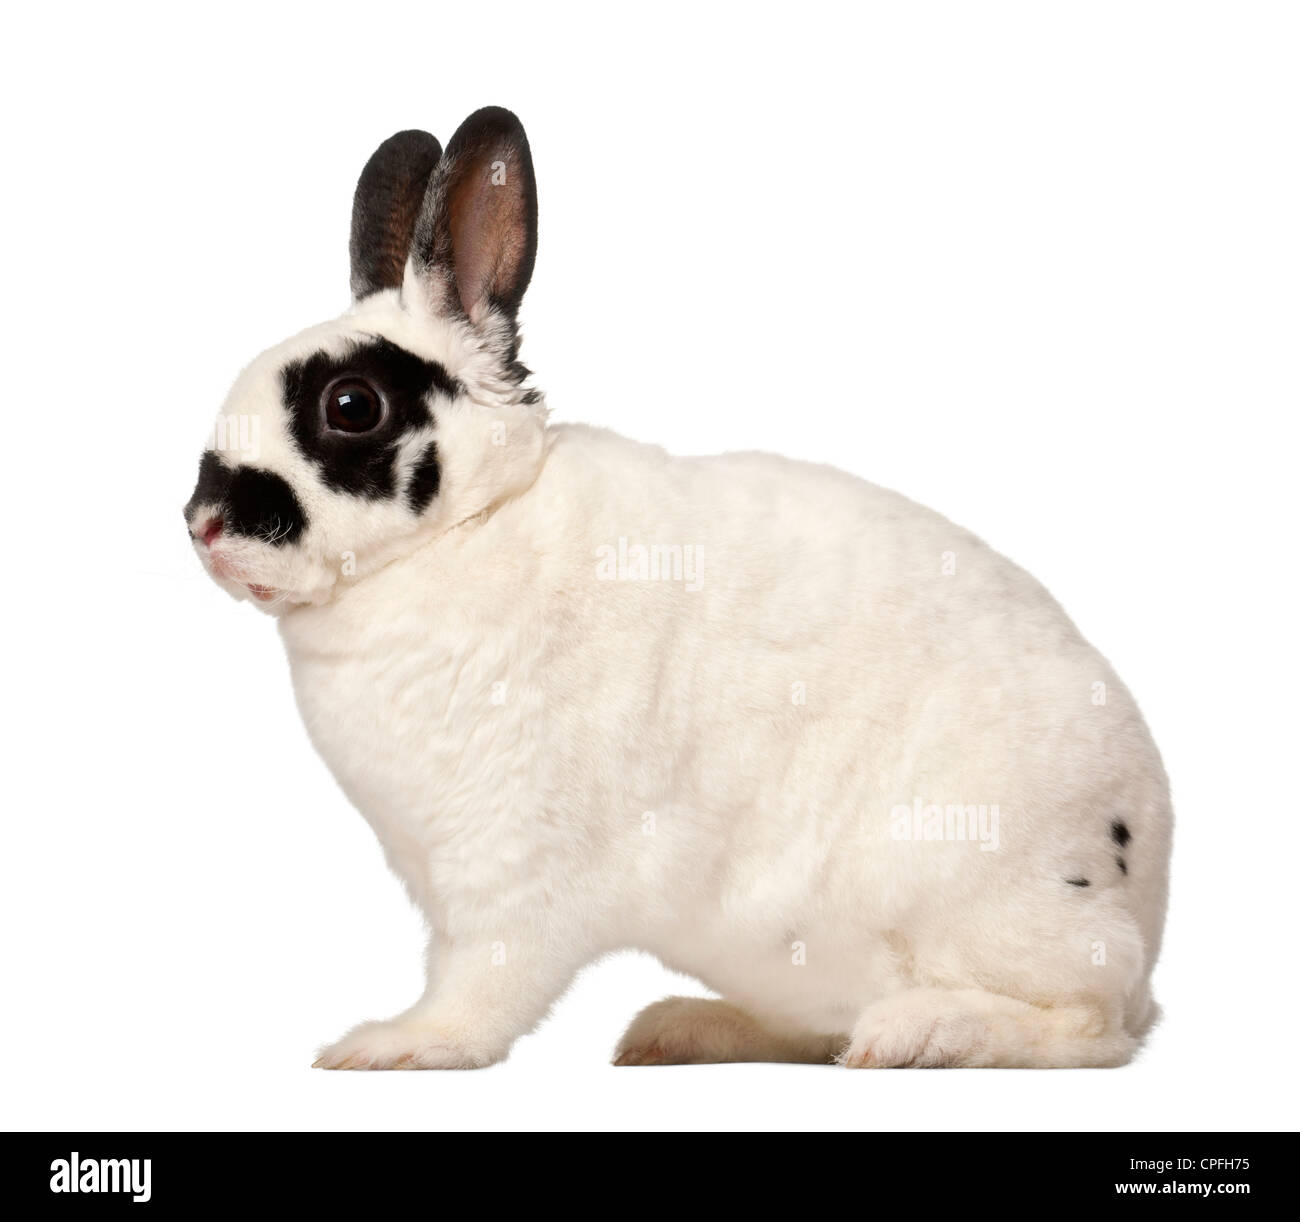 Dalmatian rabbit, Oryctolagus cuniculus, 4 months old, against white background Stock Photo